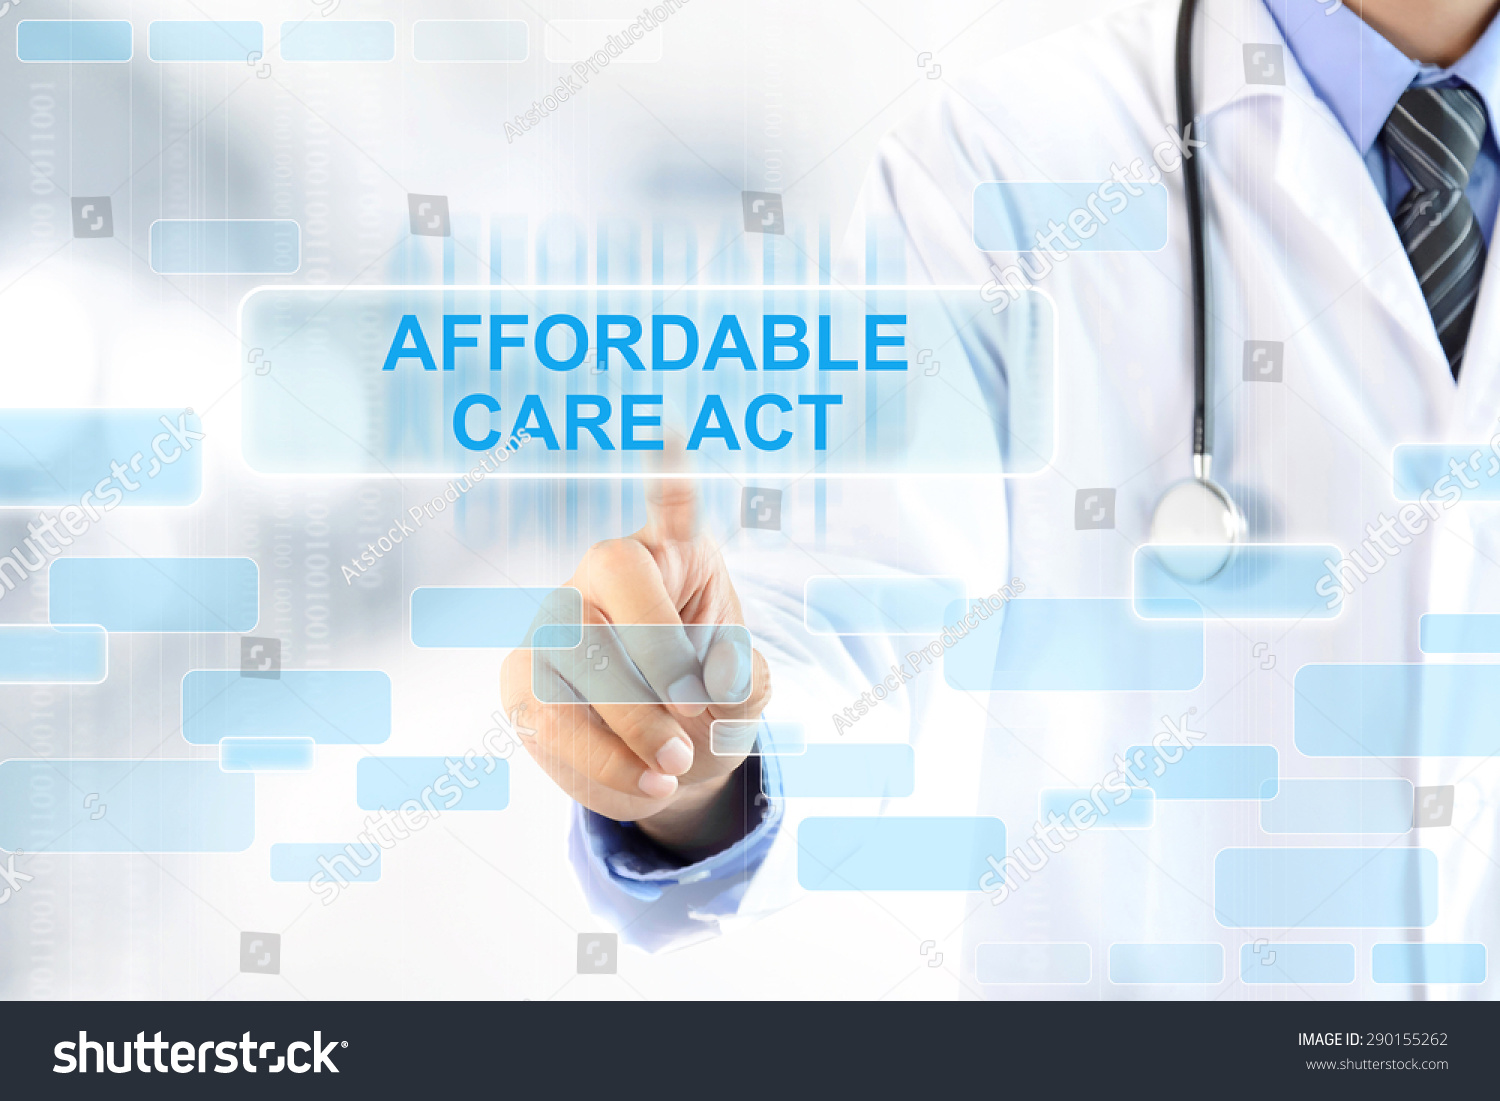 Doctor Hand Touching Affordable Care Act Stock Photo 290155262 - Shutterstock